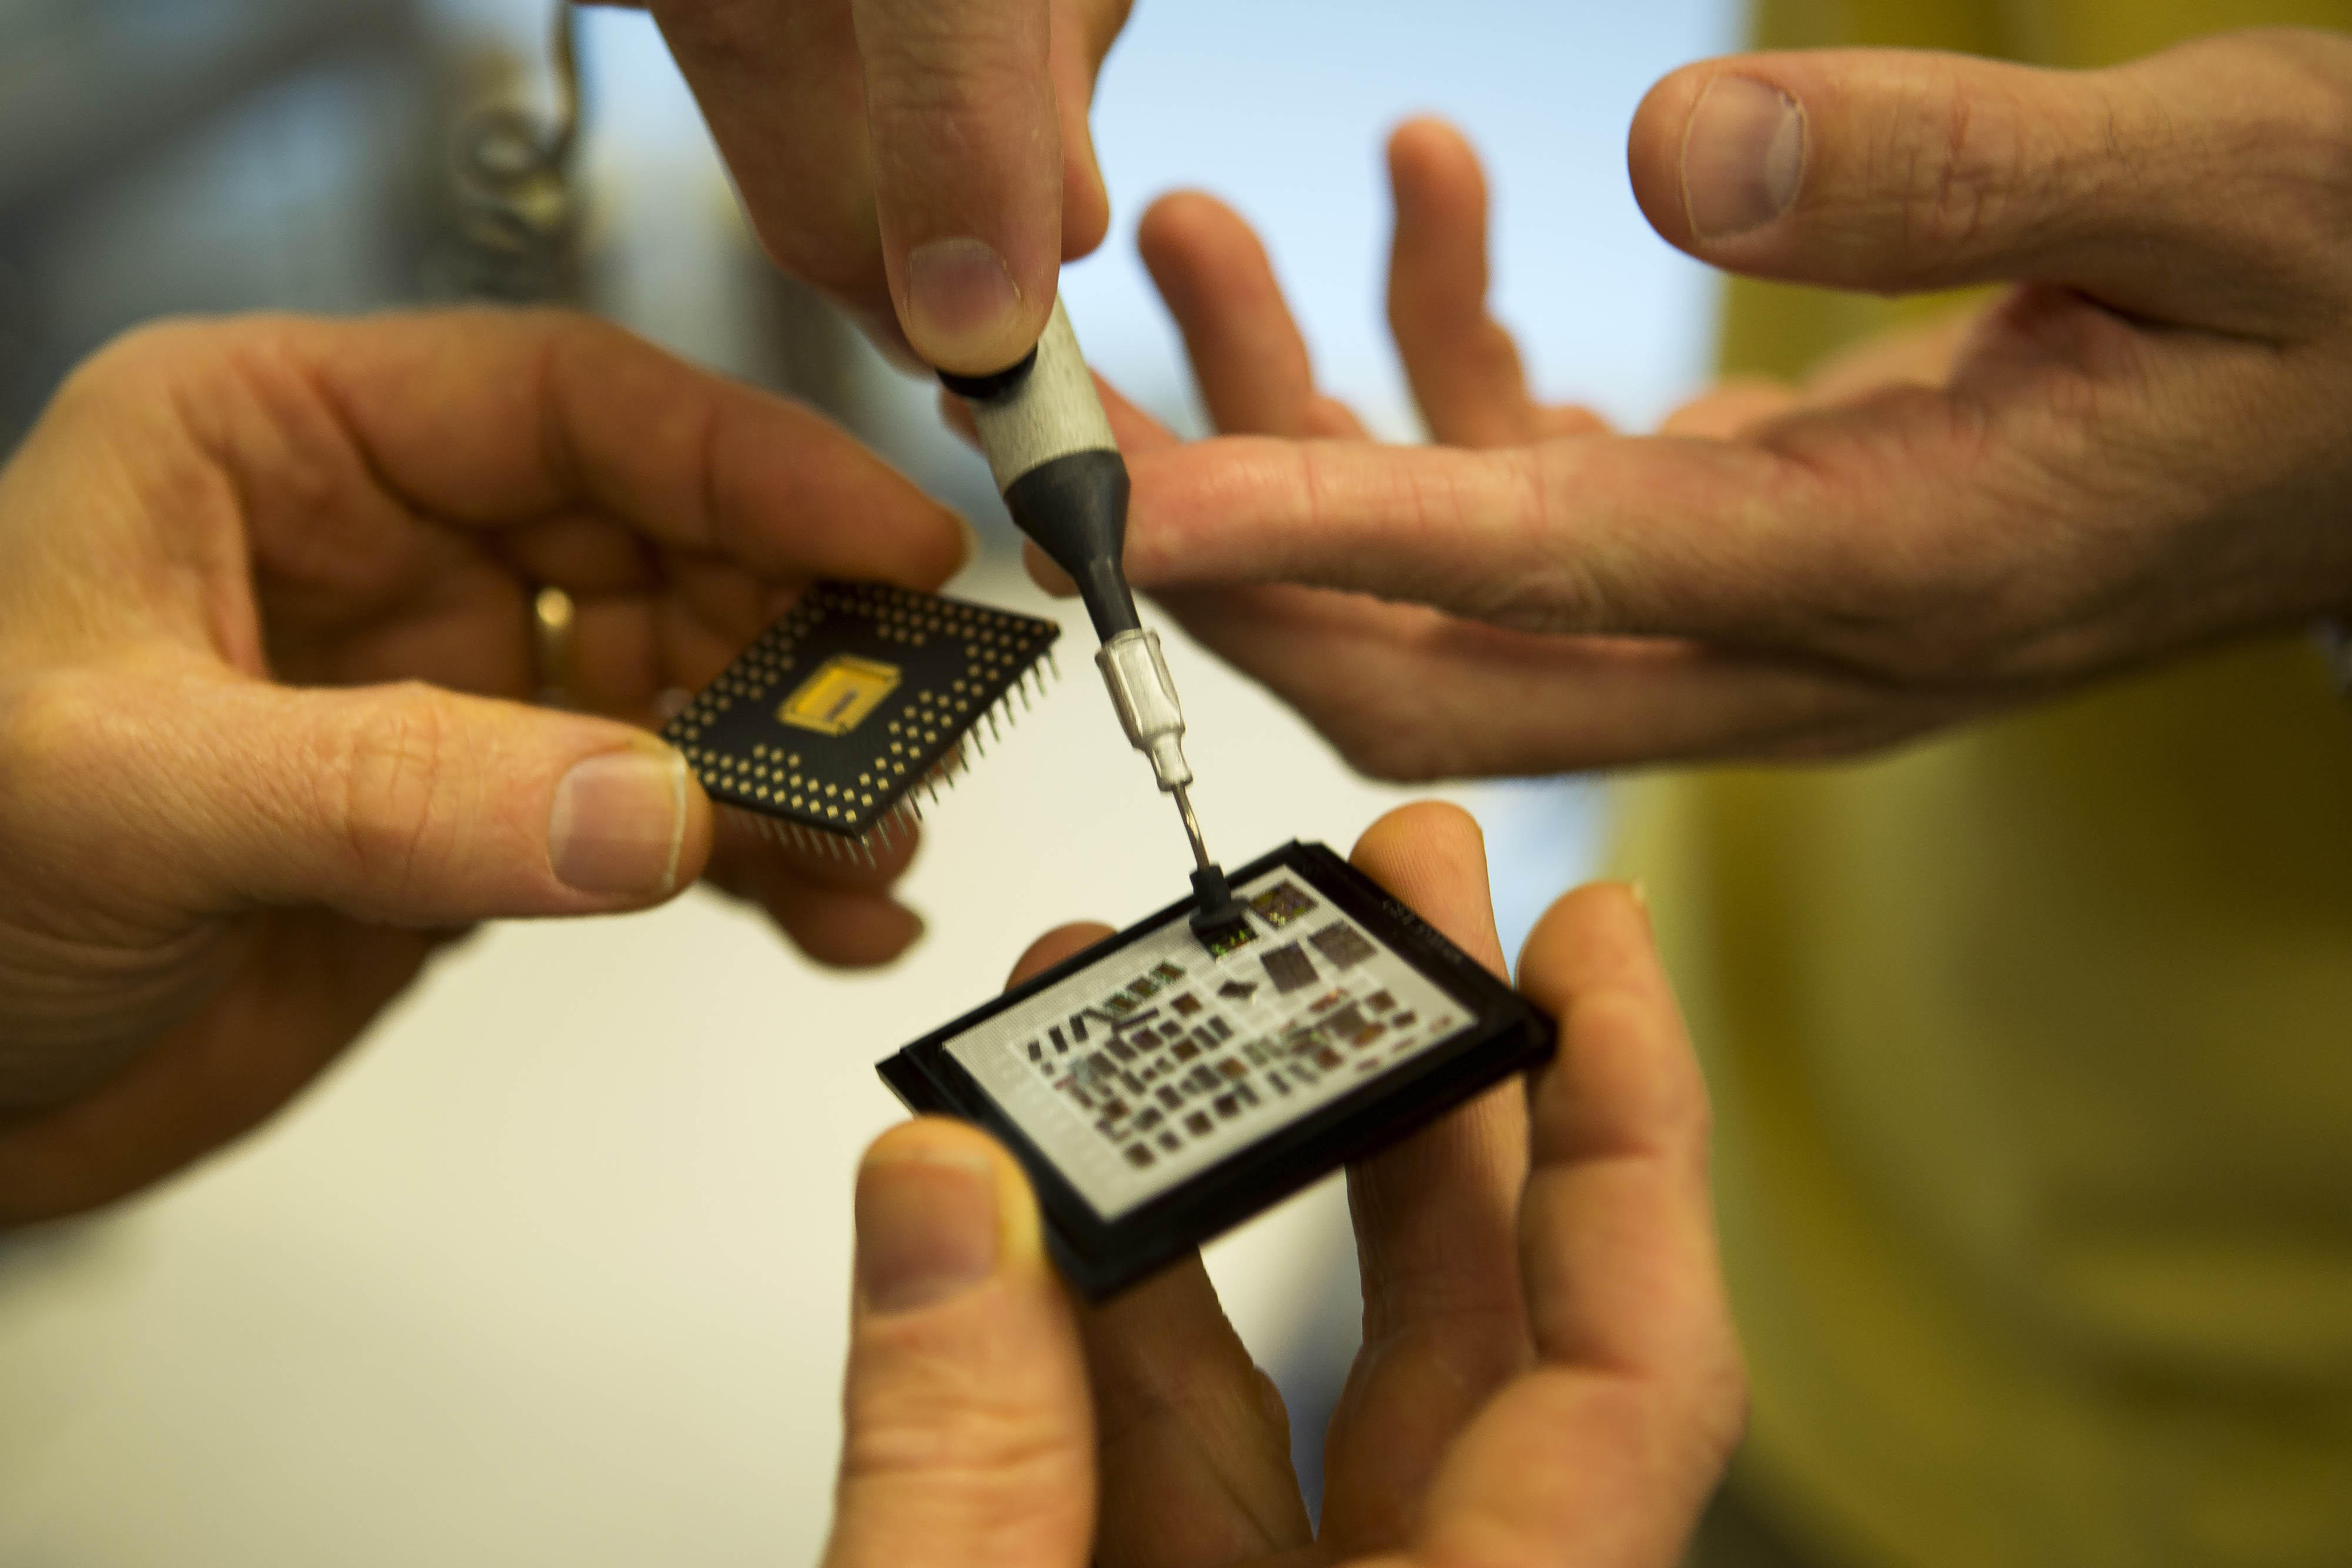 Professors work on small chips